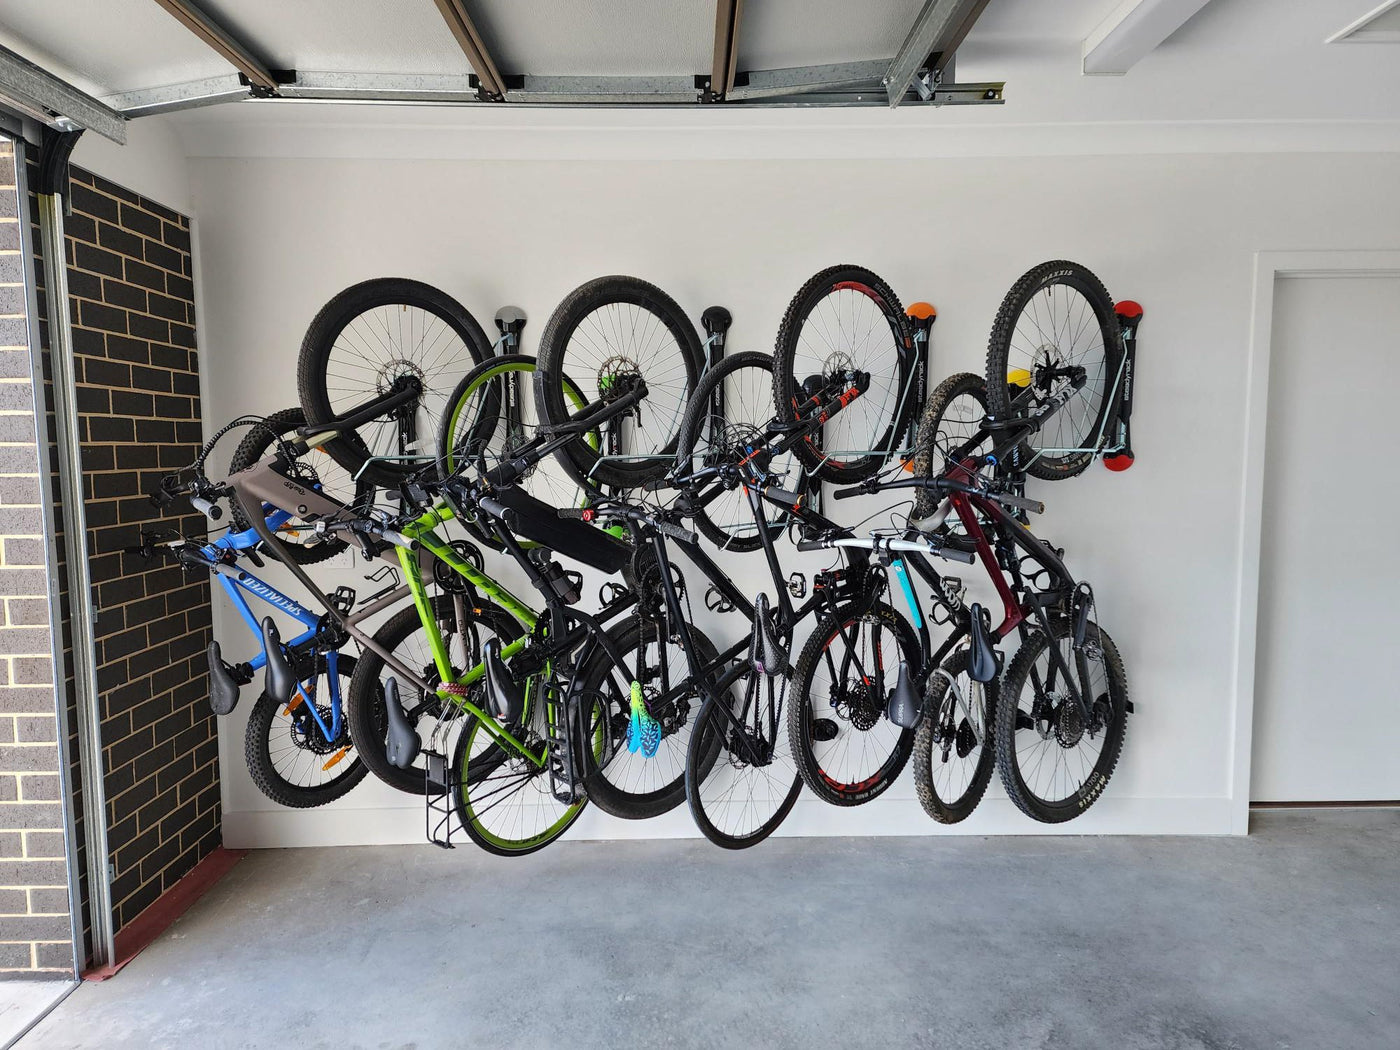 Why Our Steadyrack Wall Mount Bike Racks Are the Best Vertical Storage